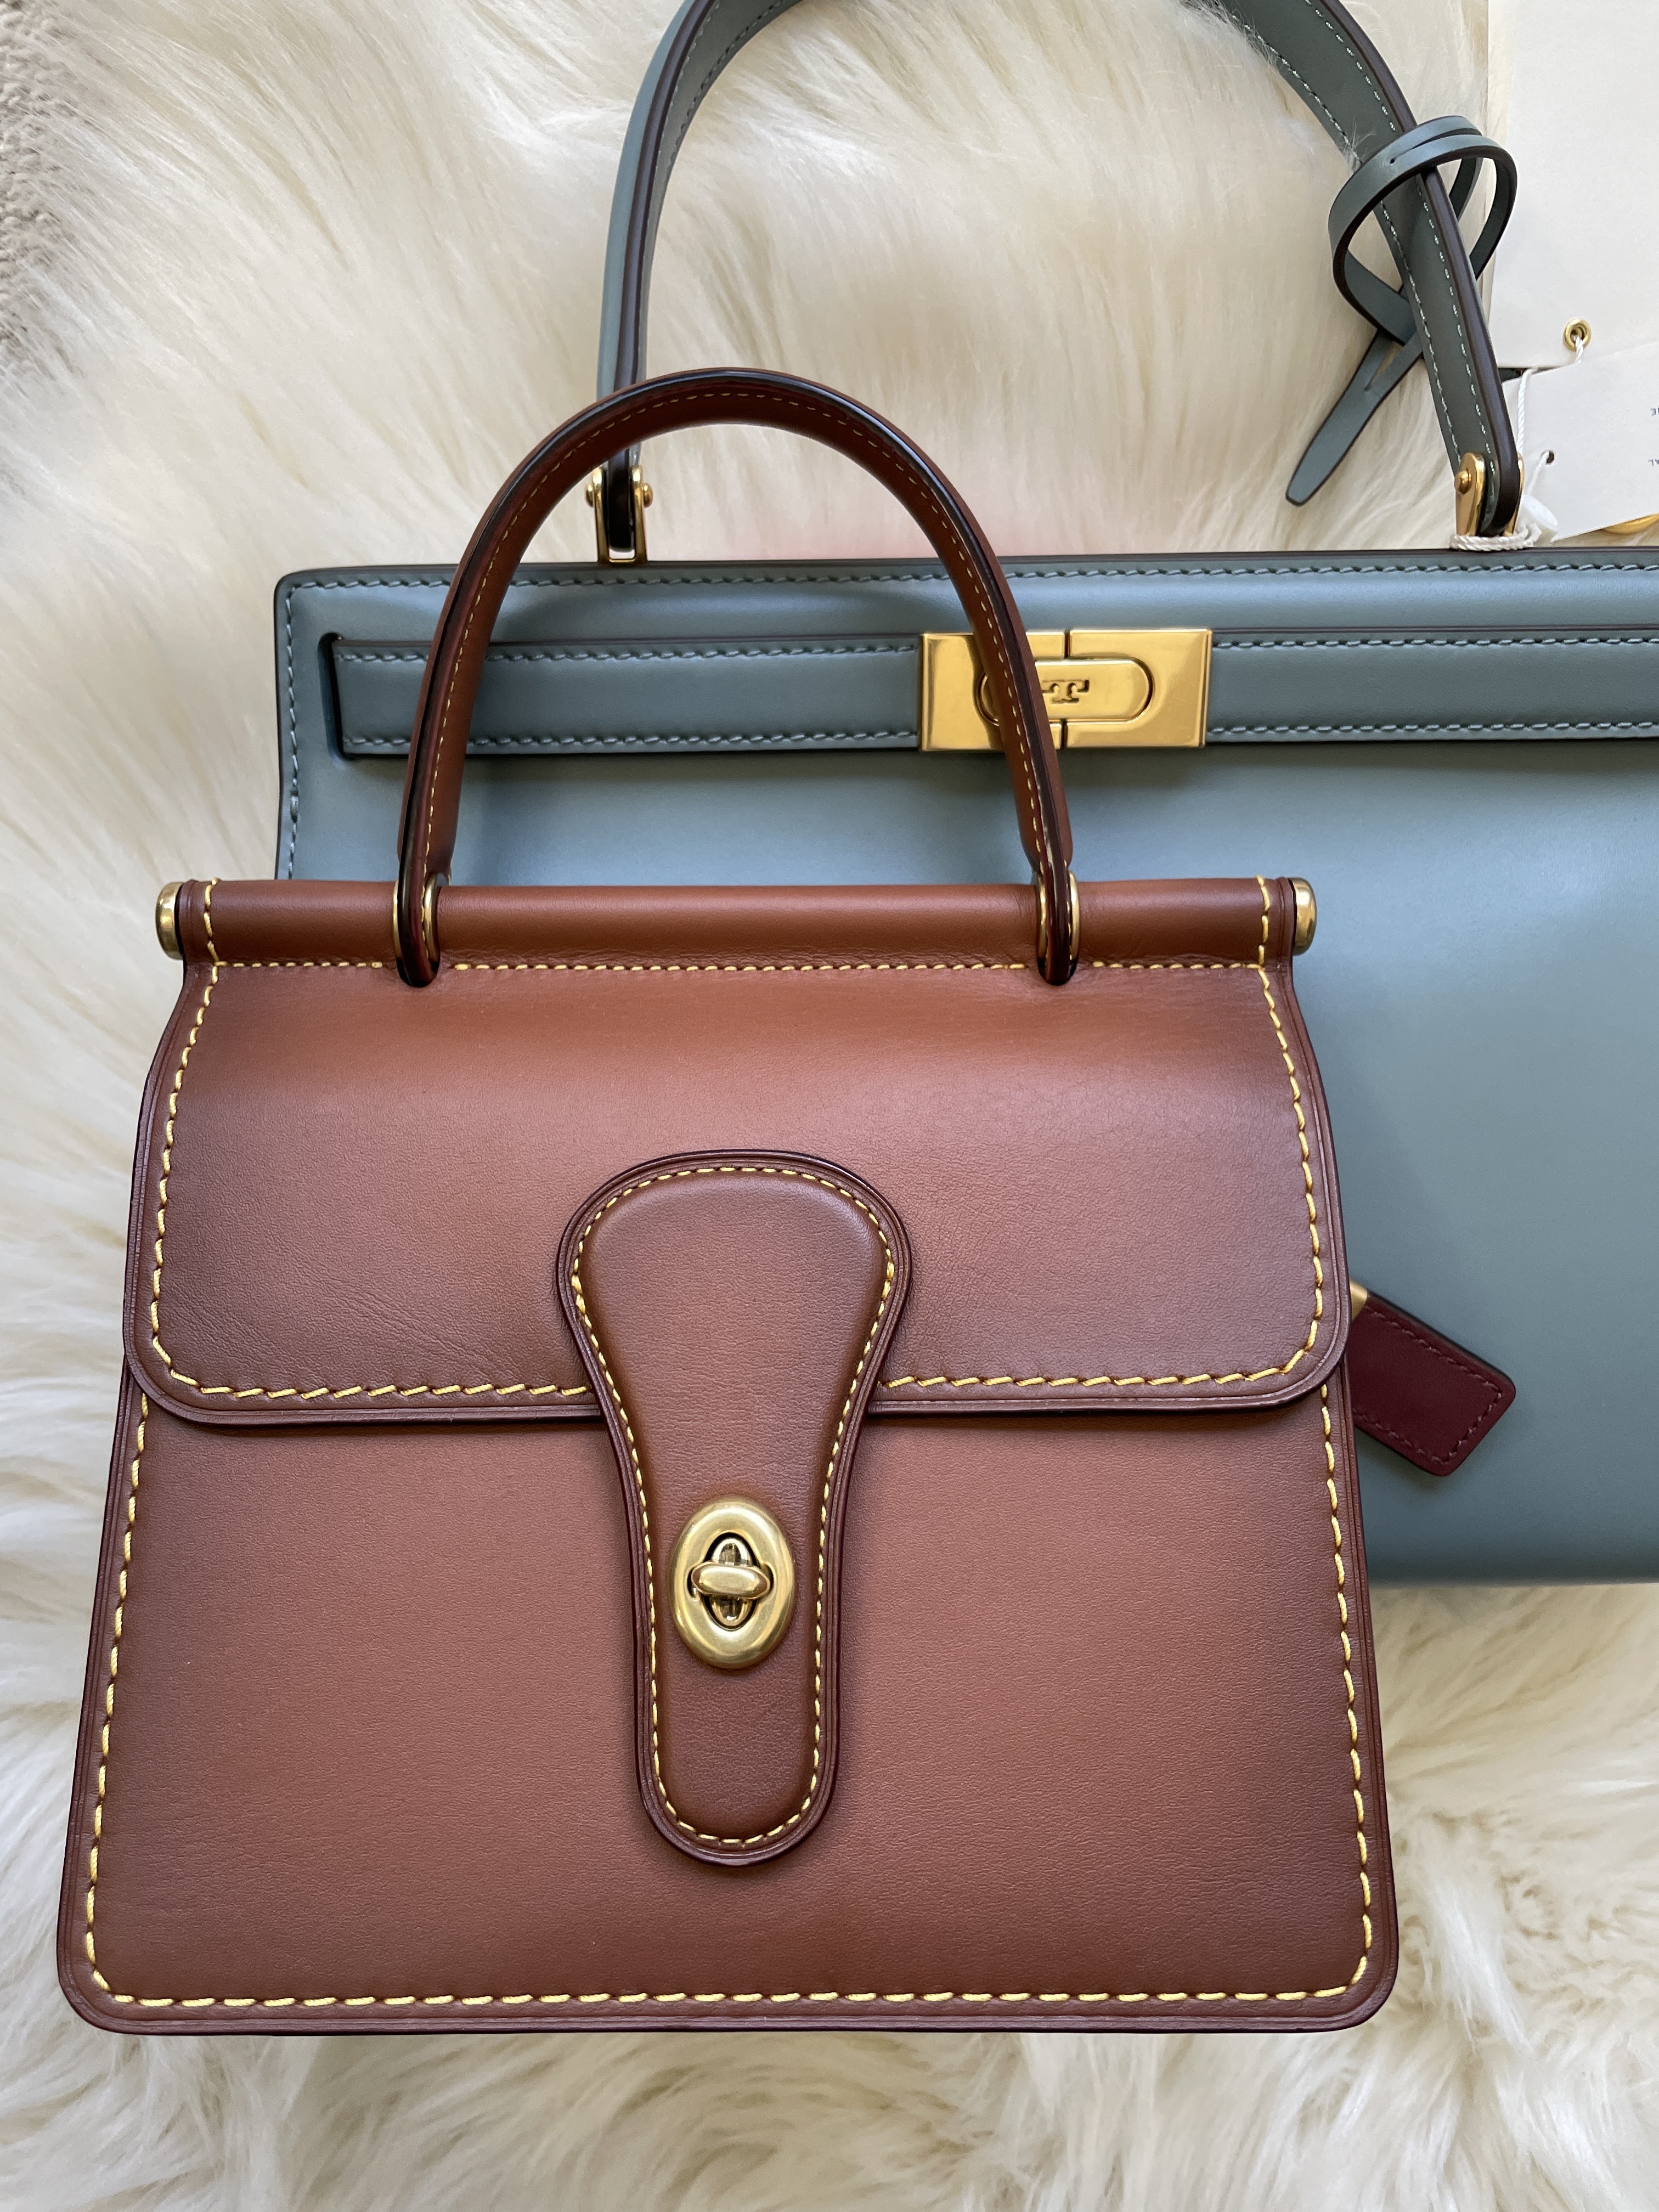 Review: Tory Burch Small Lee Radziwill Leather Bag - Elle Blogs